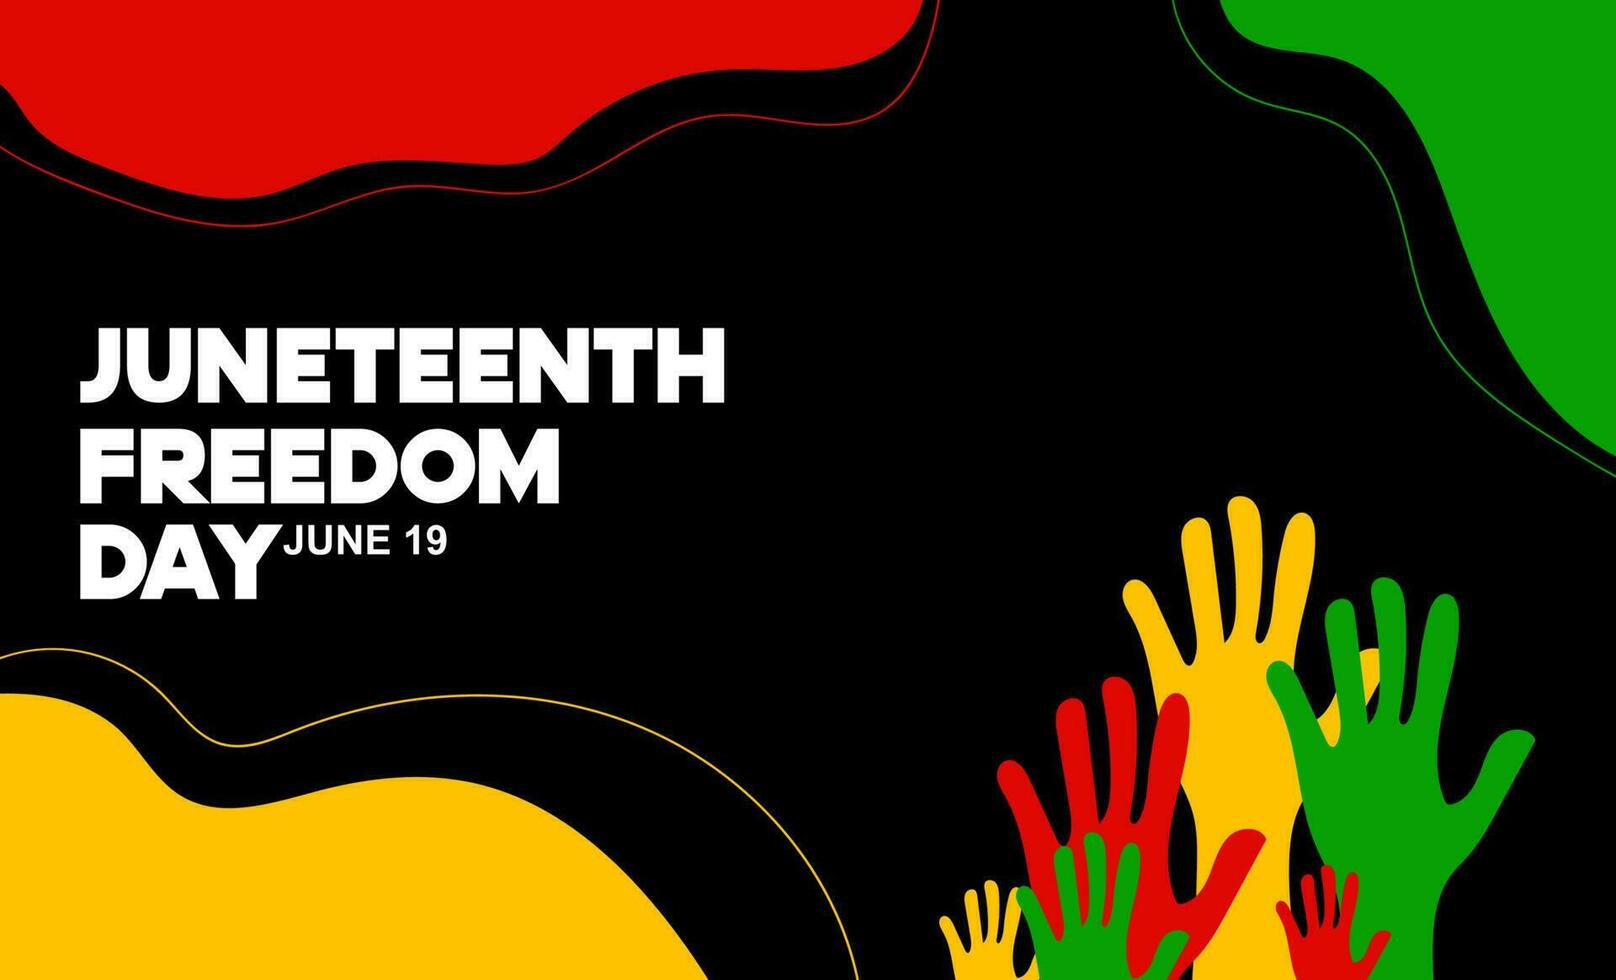 Juneteenth Freedom Day, an annual holiday in America on June 19, Juneteenth Freedom Day. hand waving decoration vector